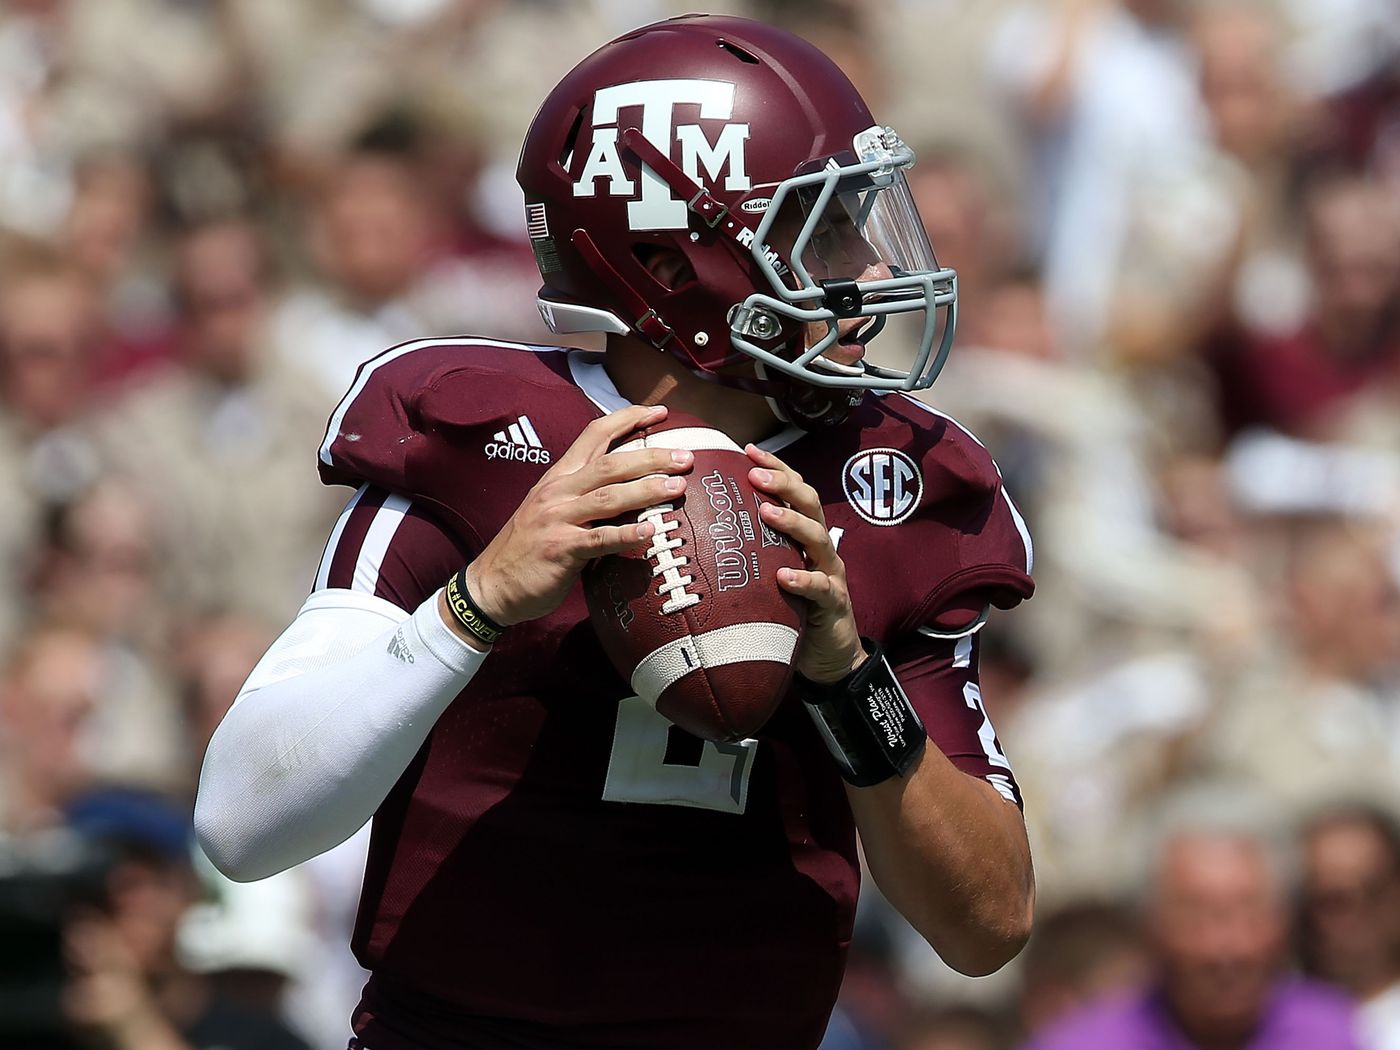 Manziel's college jersey could sell for $100,000